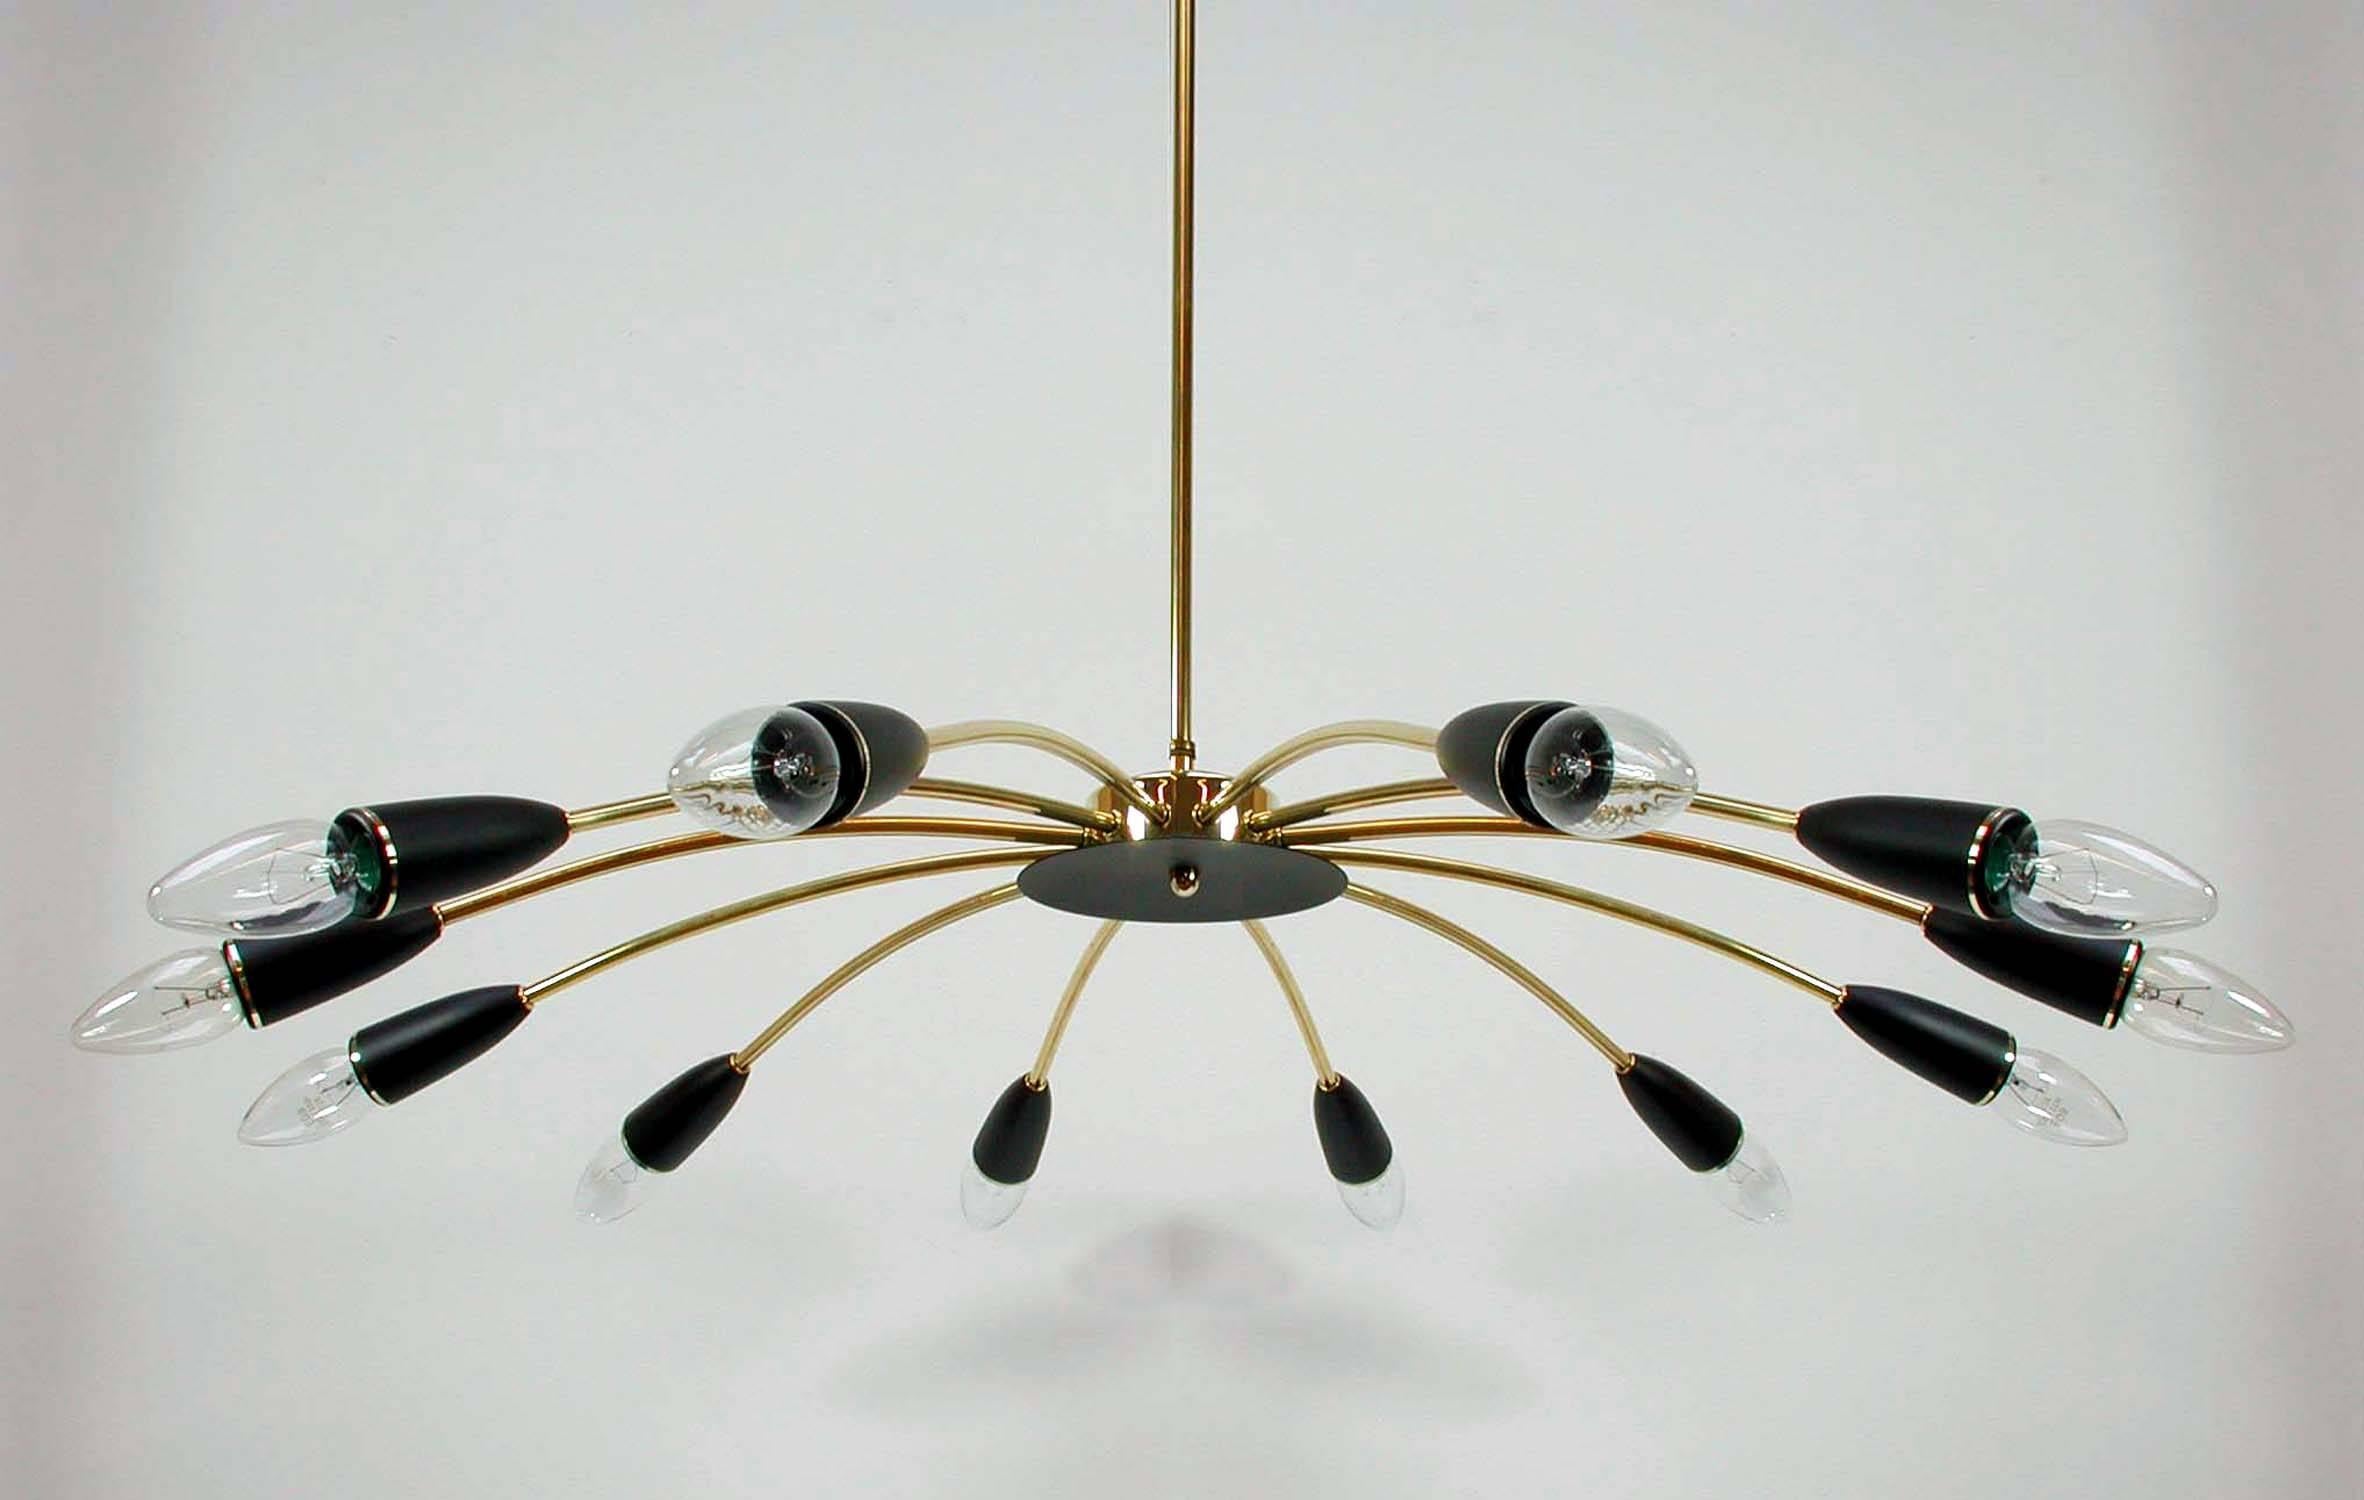 This elegant Sputnik style chandelier was manufactured in Italy in the 1950s. It is made of brass and has got 12 black lacquered bakelite bulb holders.

The brass lamp rod can be shortened or removed. When removed the chandelier can be used as a